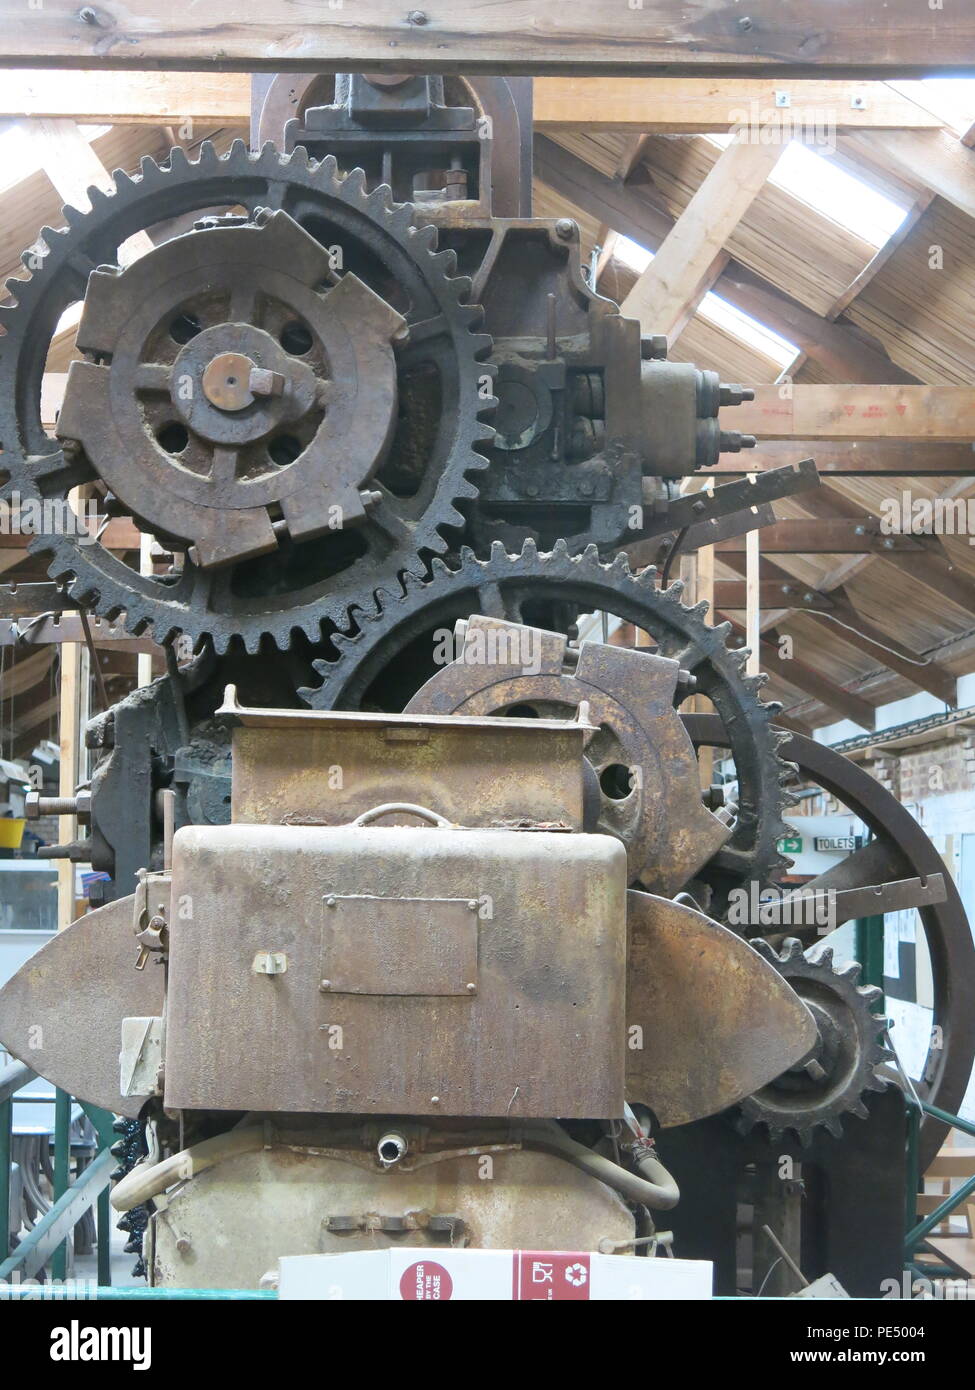 Bursledon Brickworks Industrial Museum is Britain's only steam driven brickworks; photo shows detail of the cogwheels on the brick making machinery Stock Photo